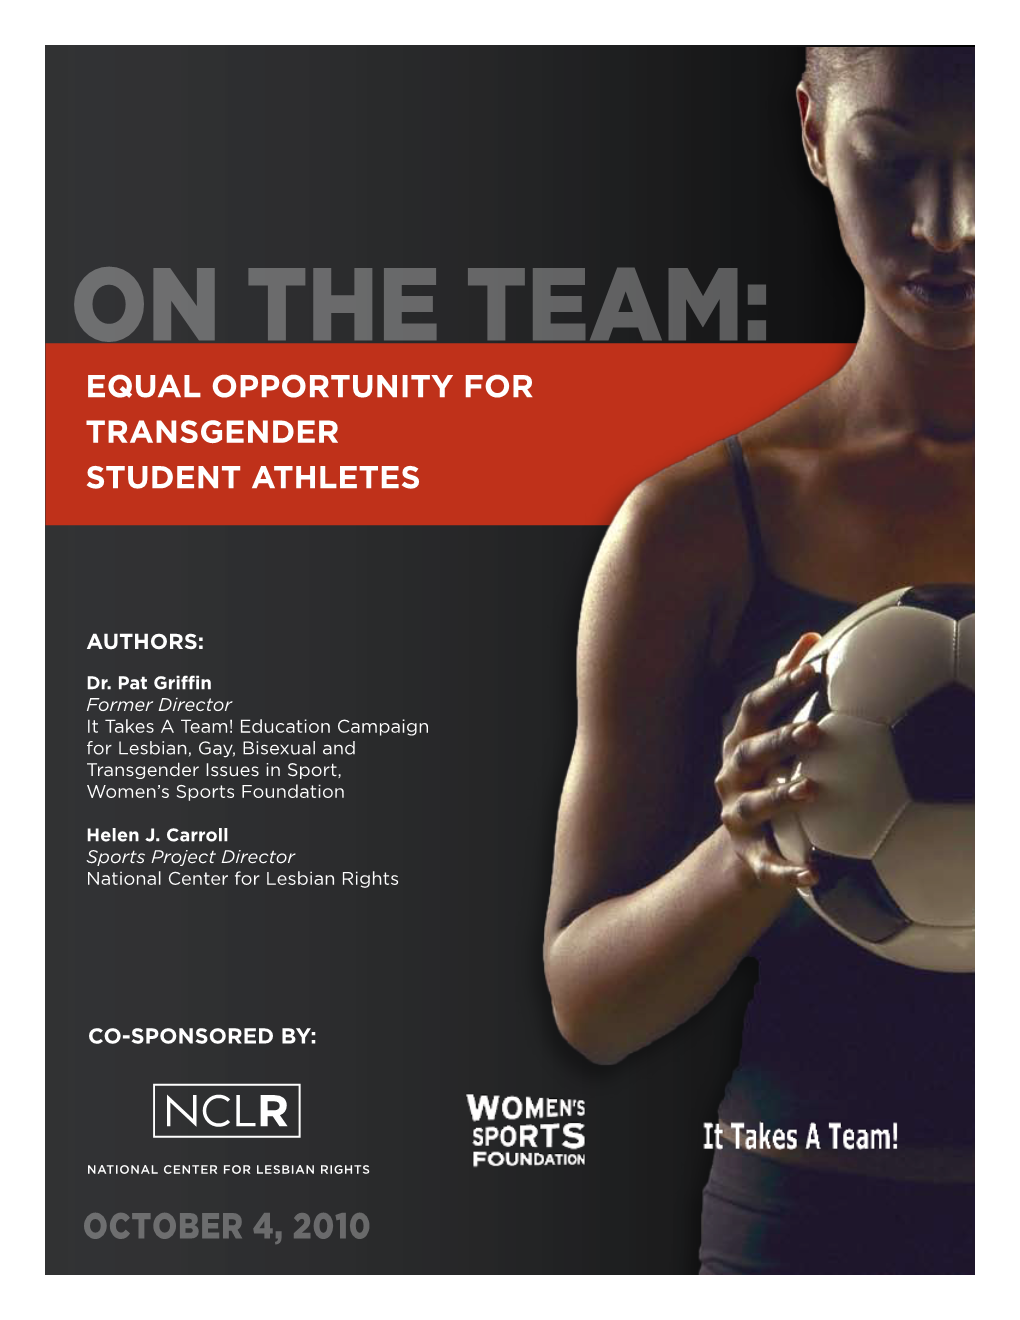 On the Team: Equal Opportunity for Transgender Student Athletes